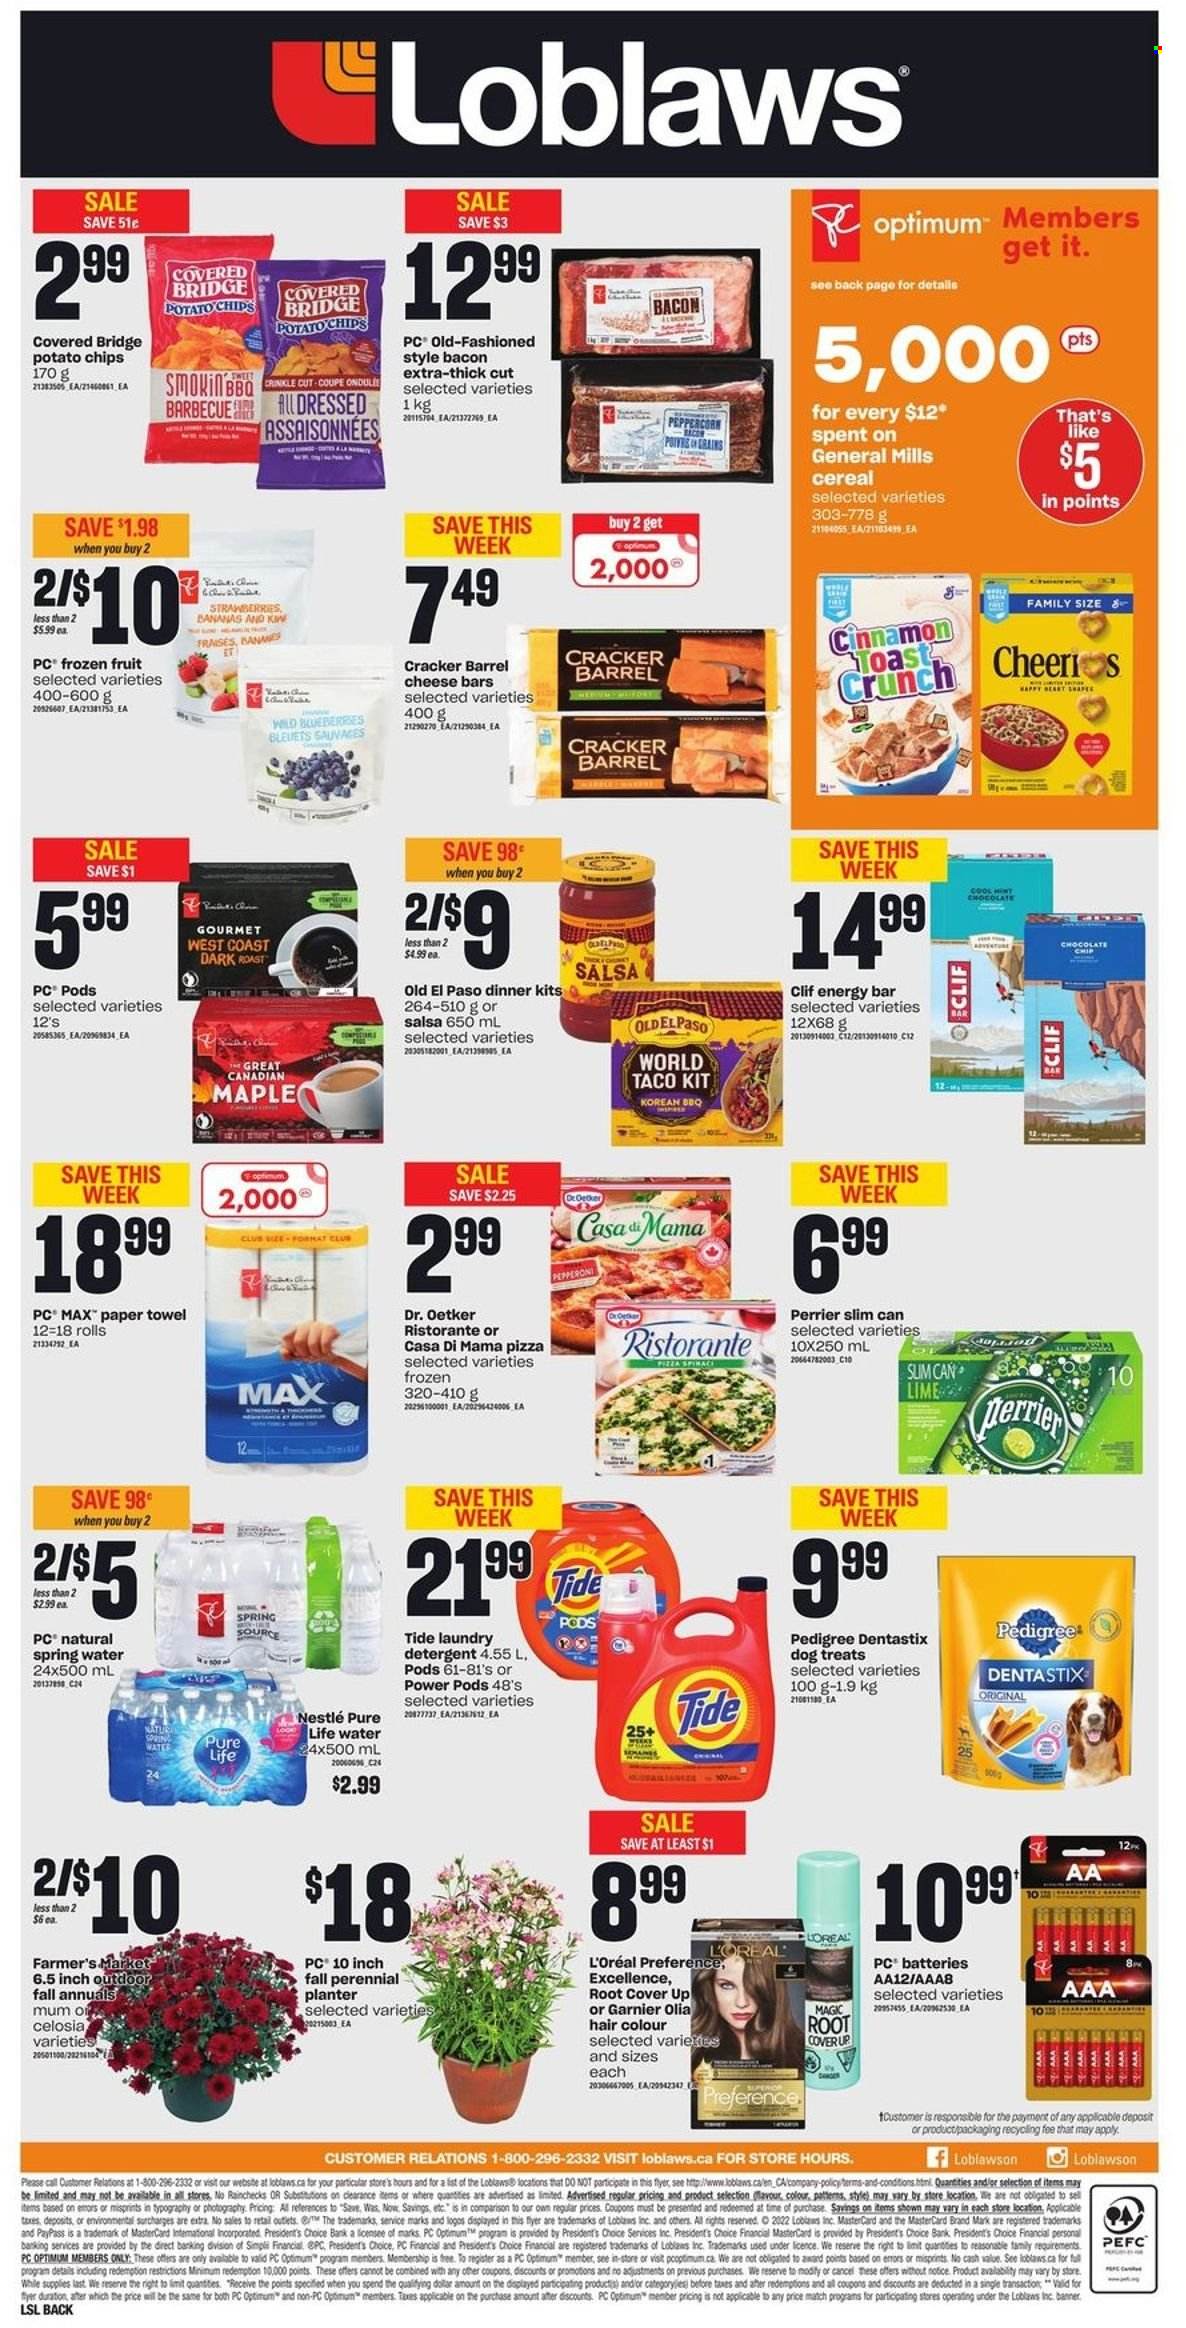 Loblaws flyer  - August 18, 2022 - August 24, 2022.